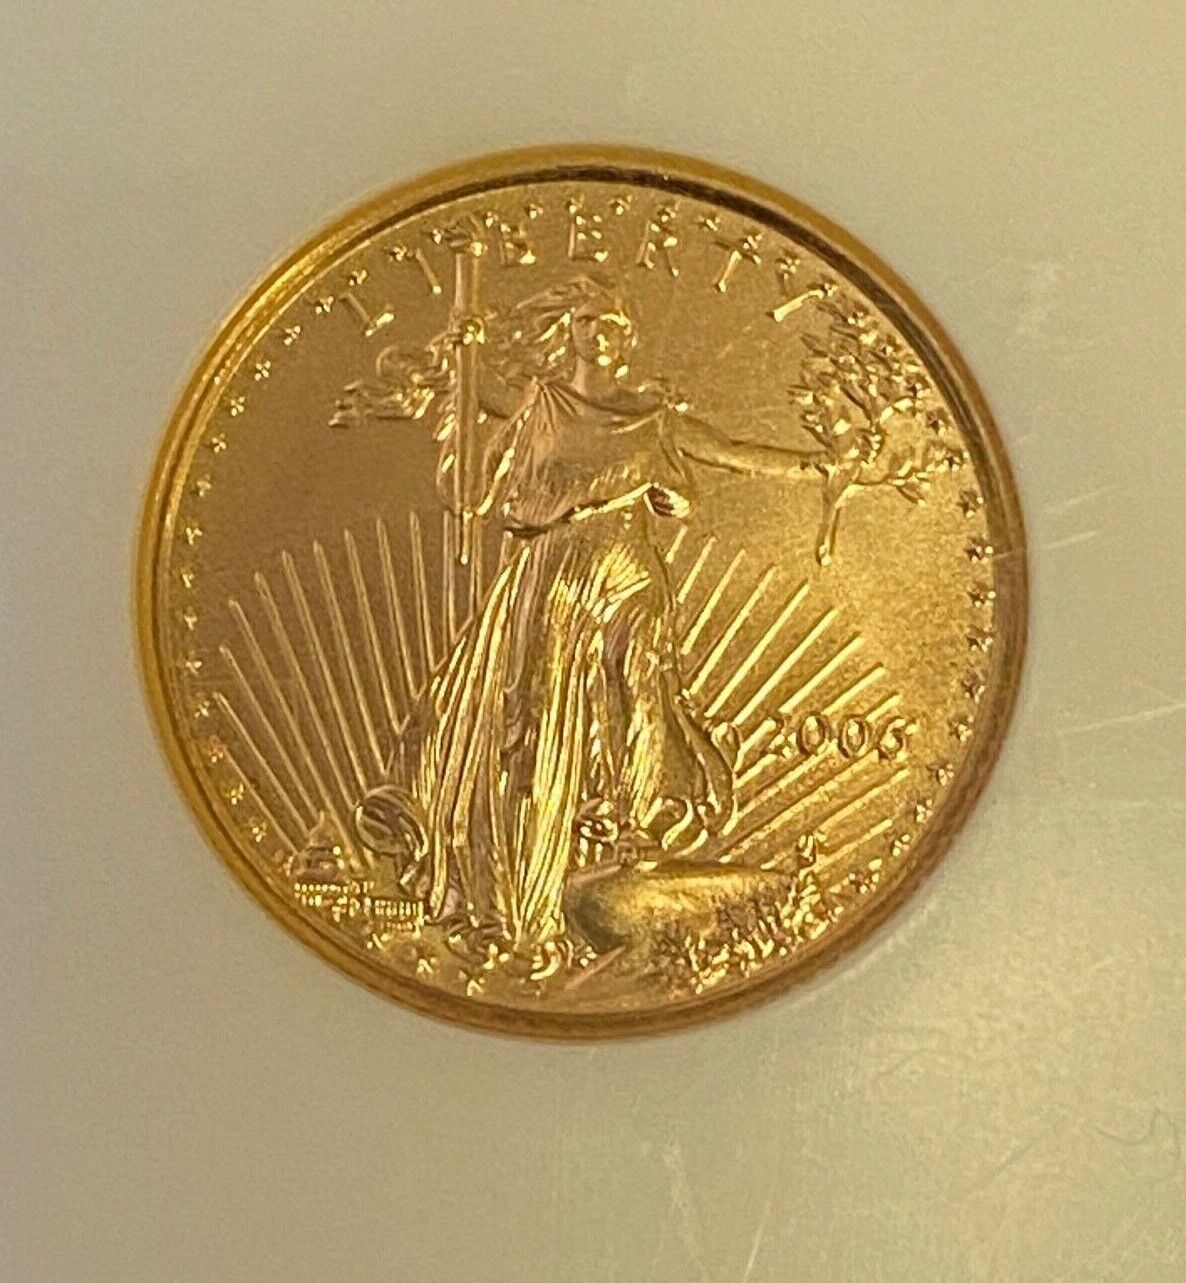 2006 American Gold Eagle 1/10oz $5 - NGC GEM UNCIRCULATED, FIRST